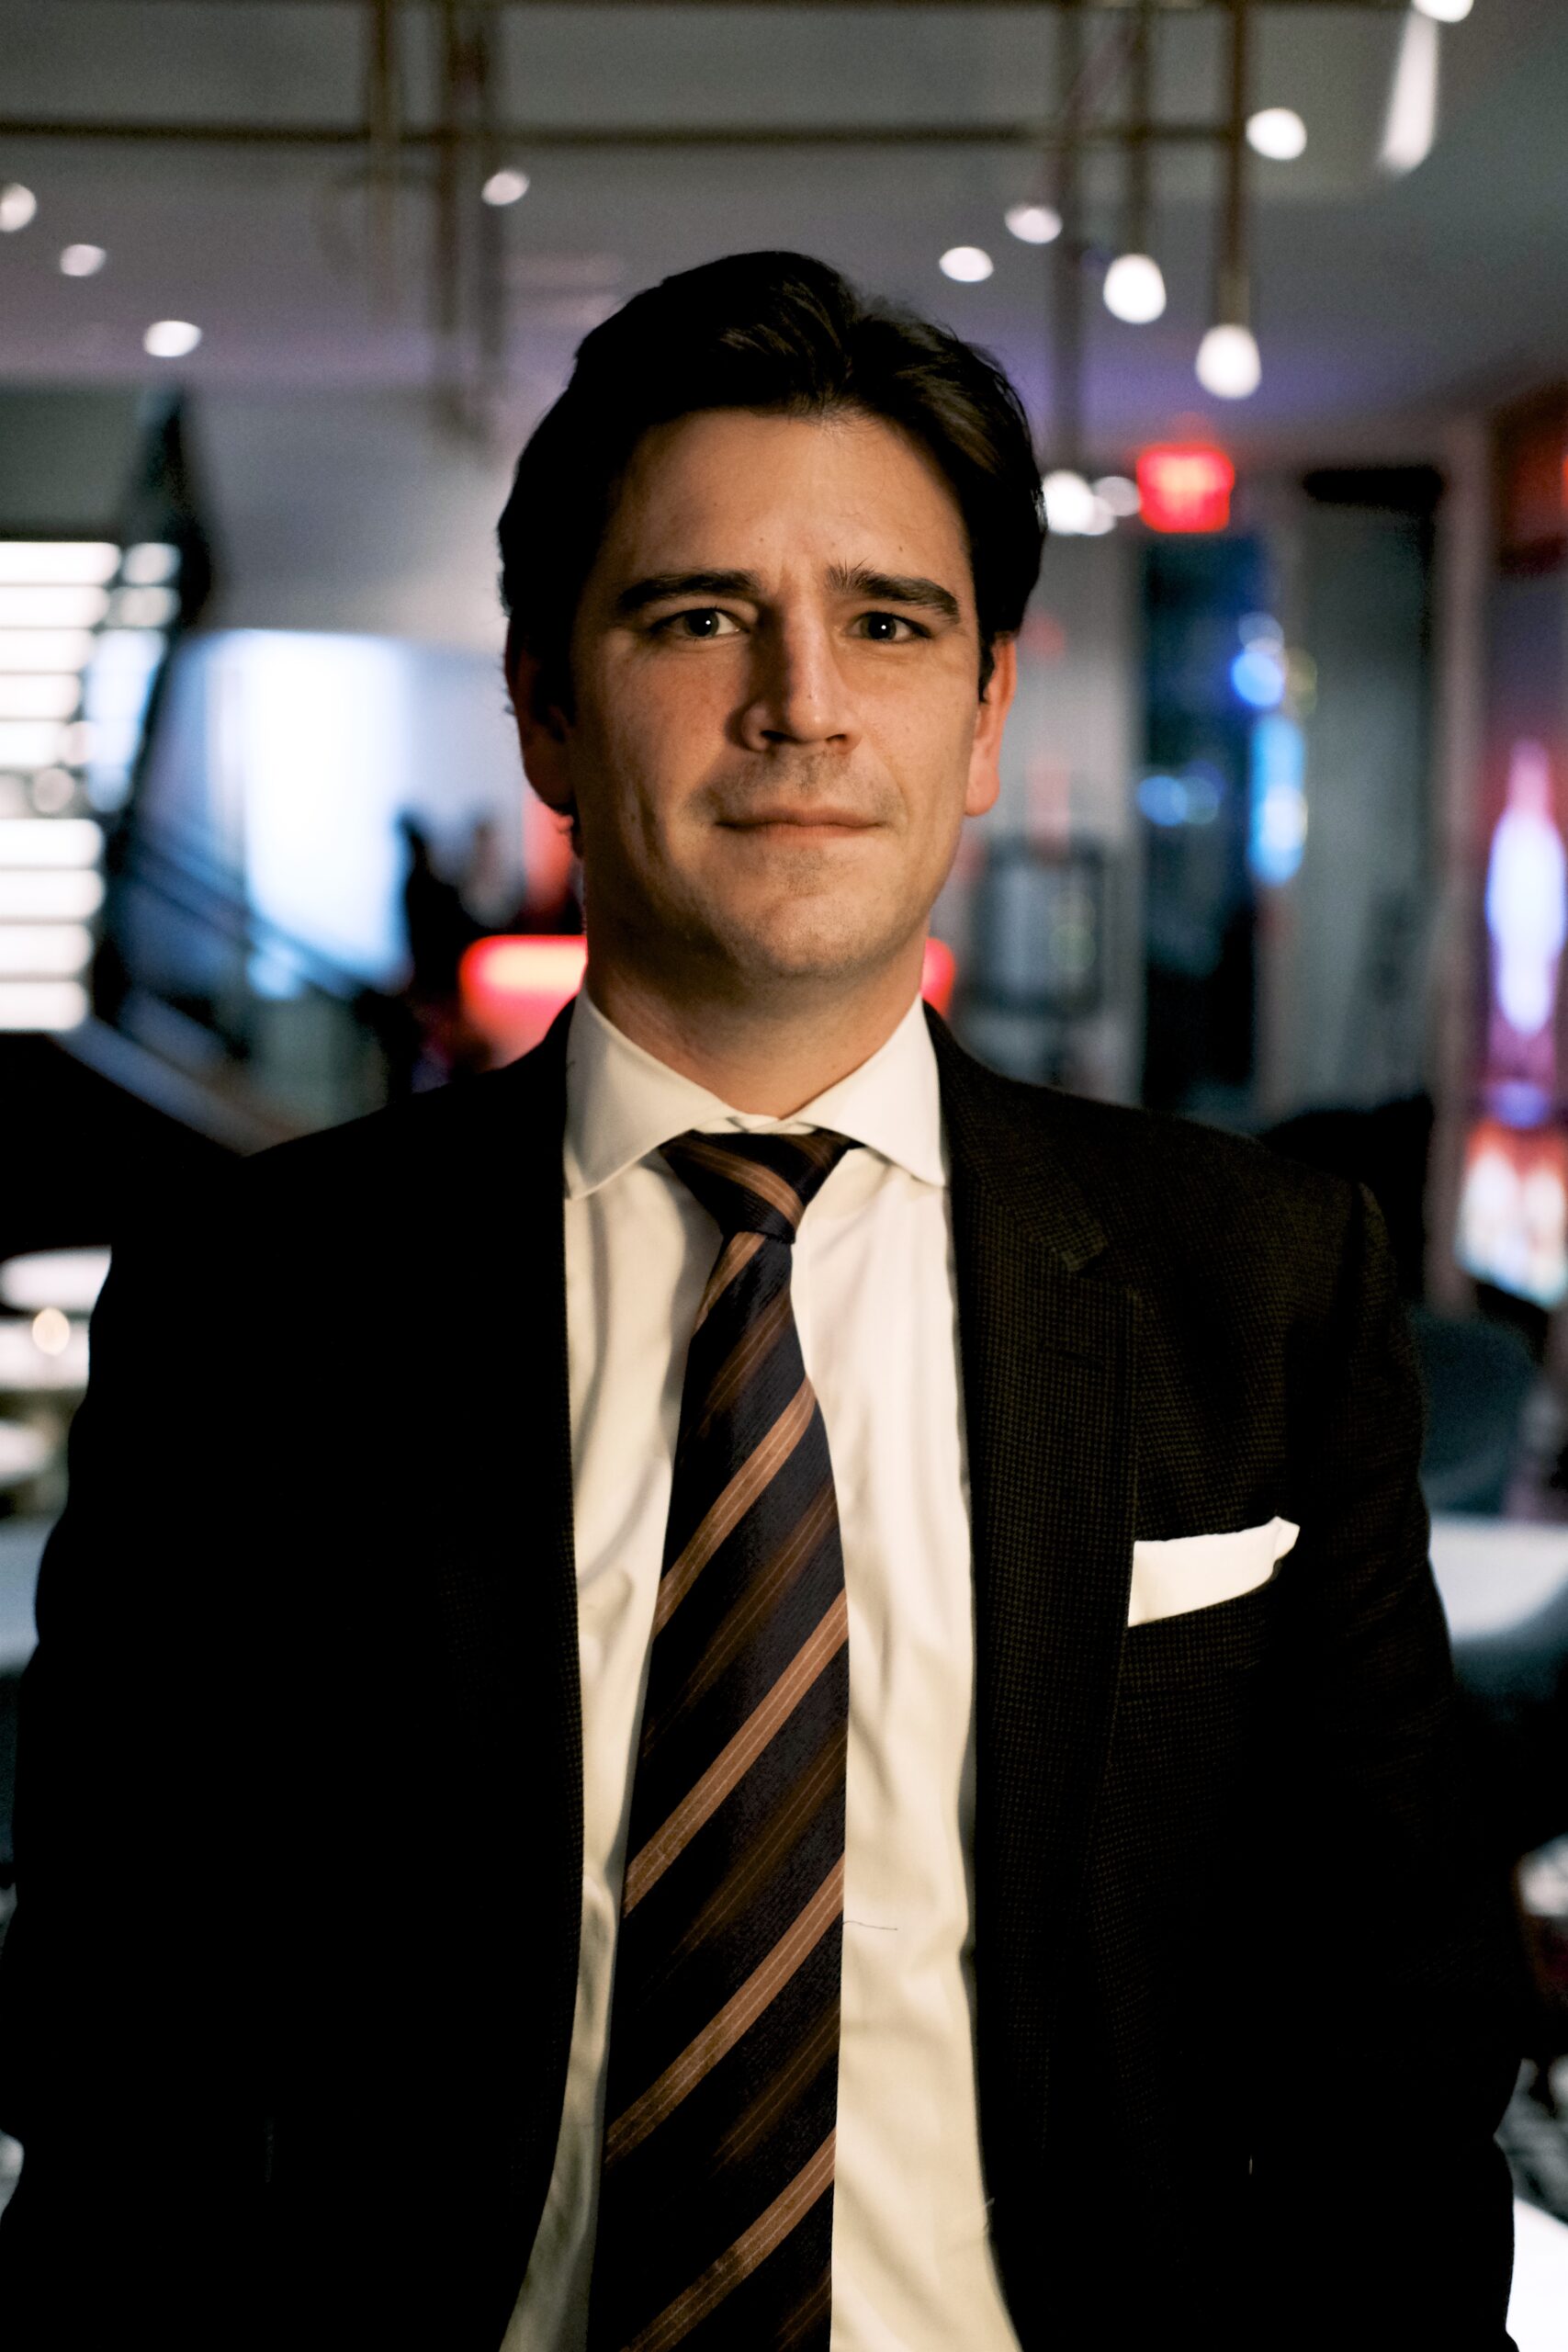 Headshot of Bill McMorris standing in a suit with lights in the background.